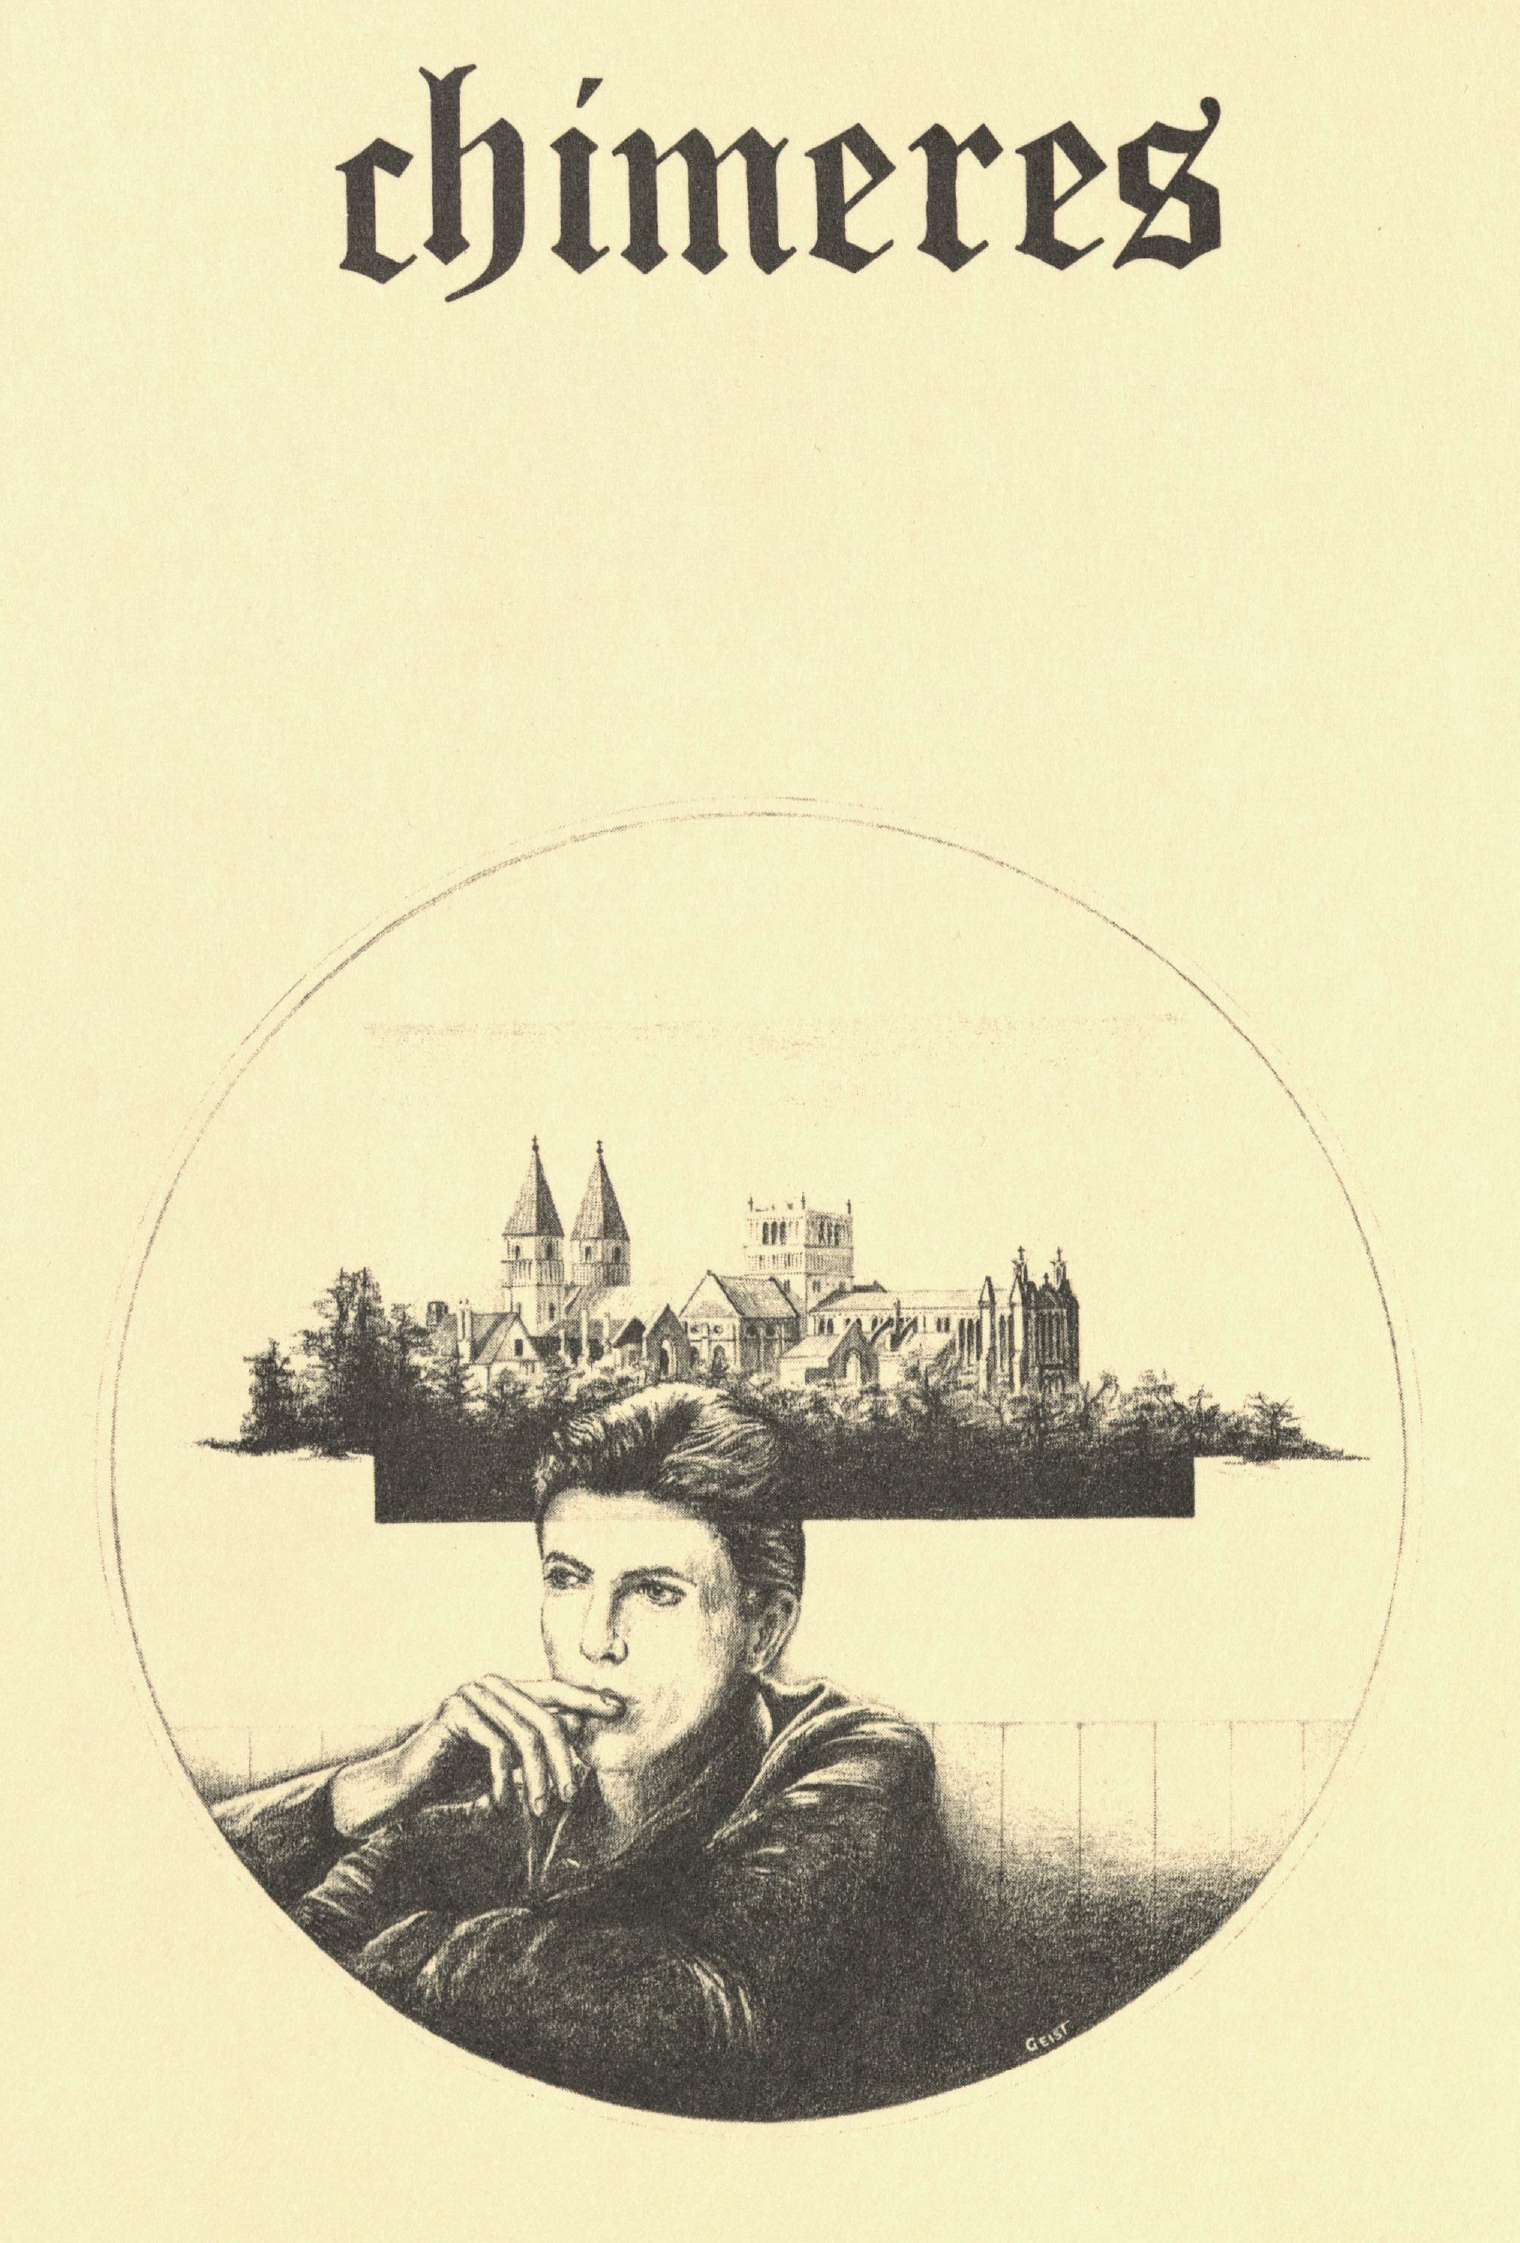 Cover for Chimères, Vol. 11.1, Fall 1977